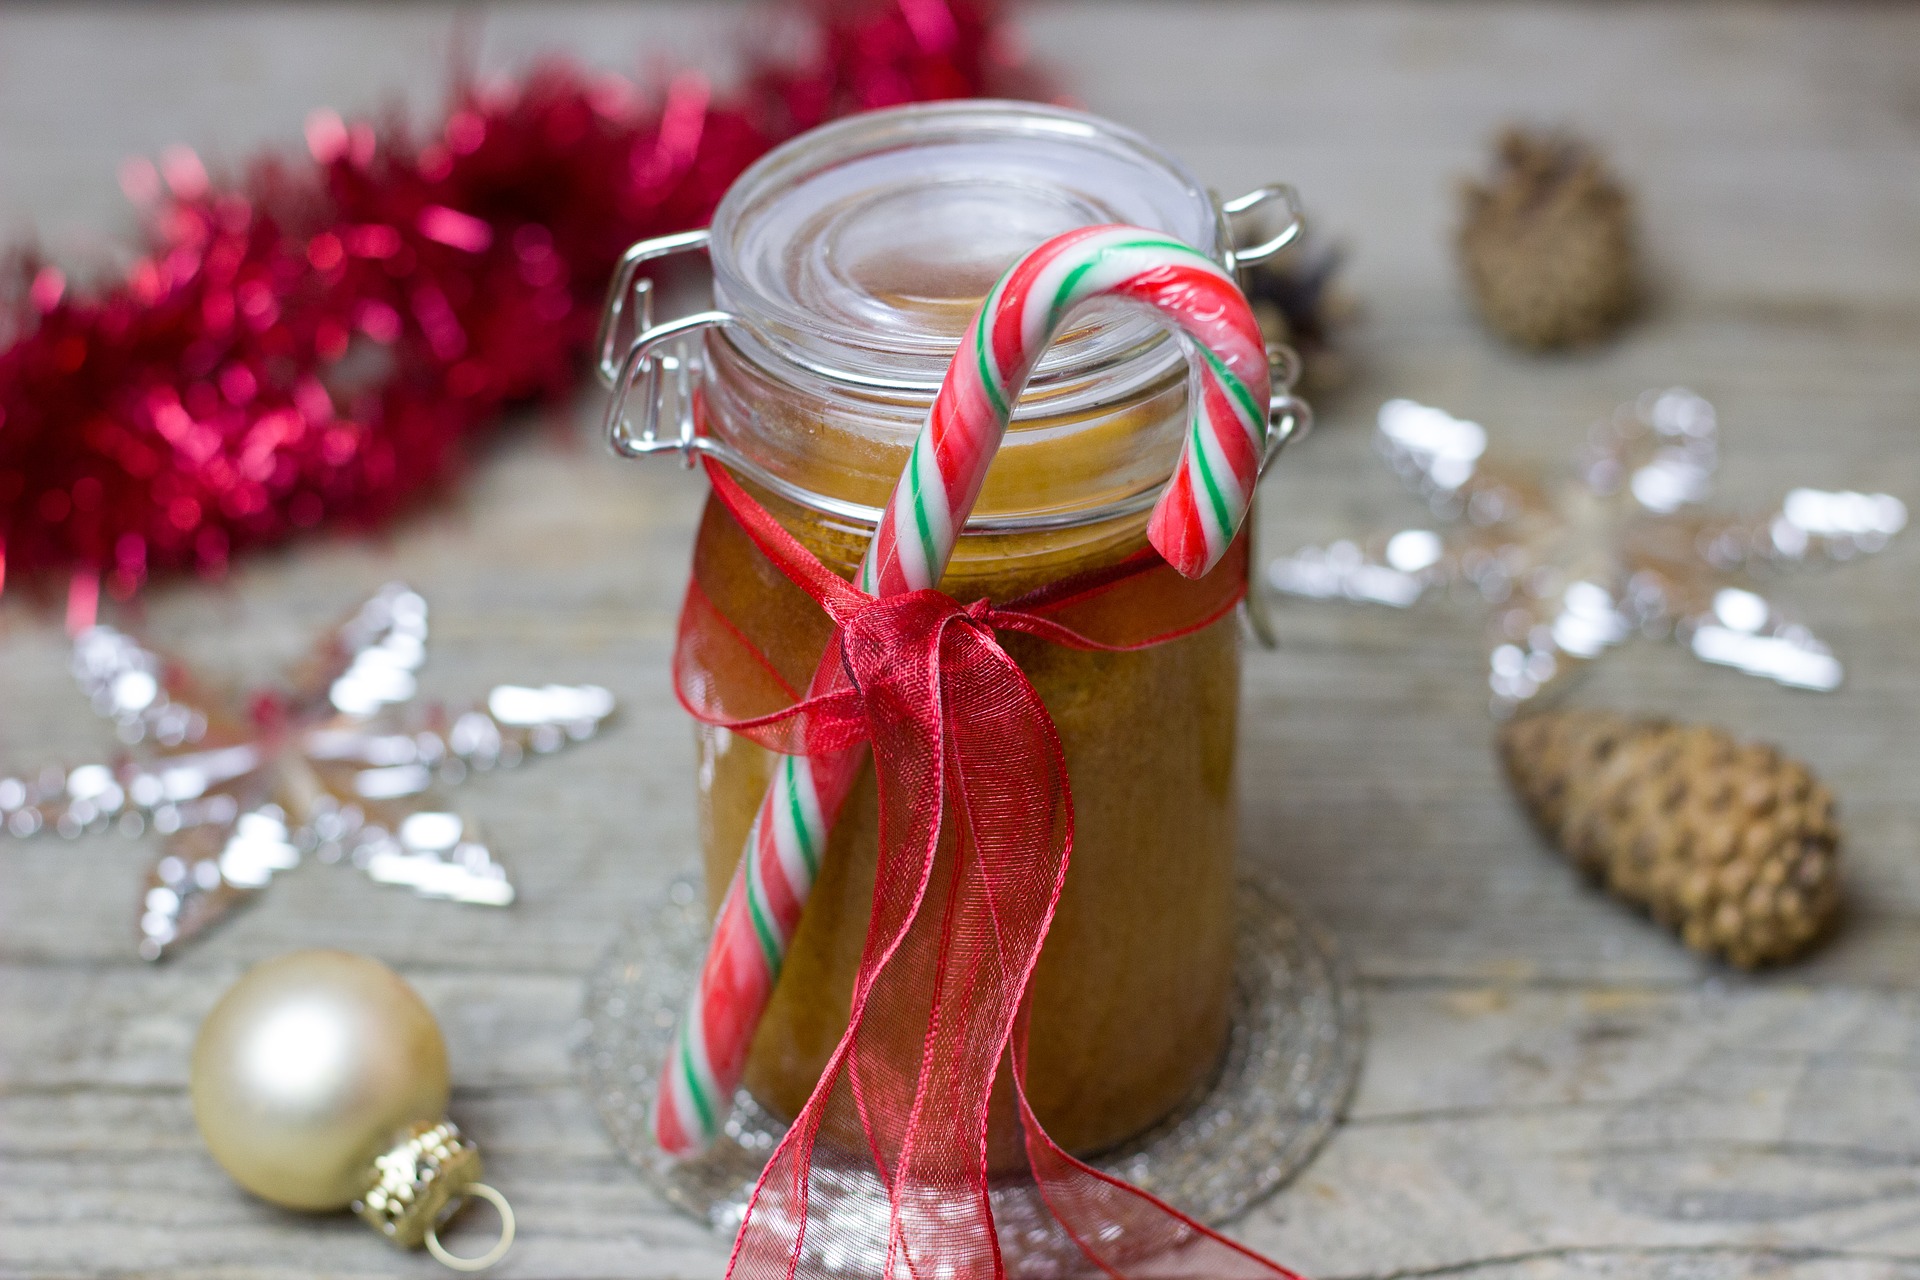 Homemade holiday gift in Mason jar wth candy cane and ribbon